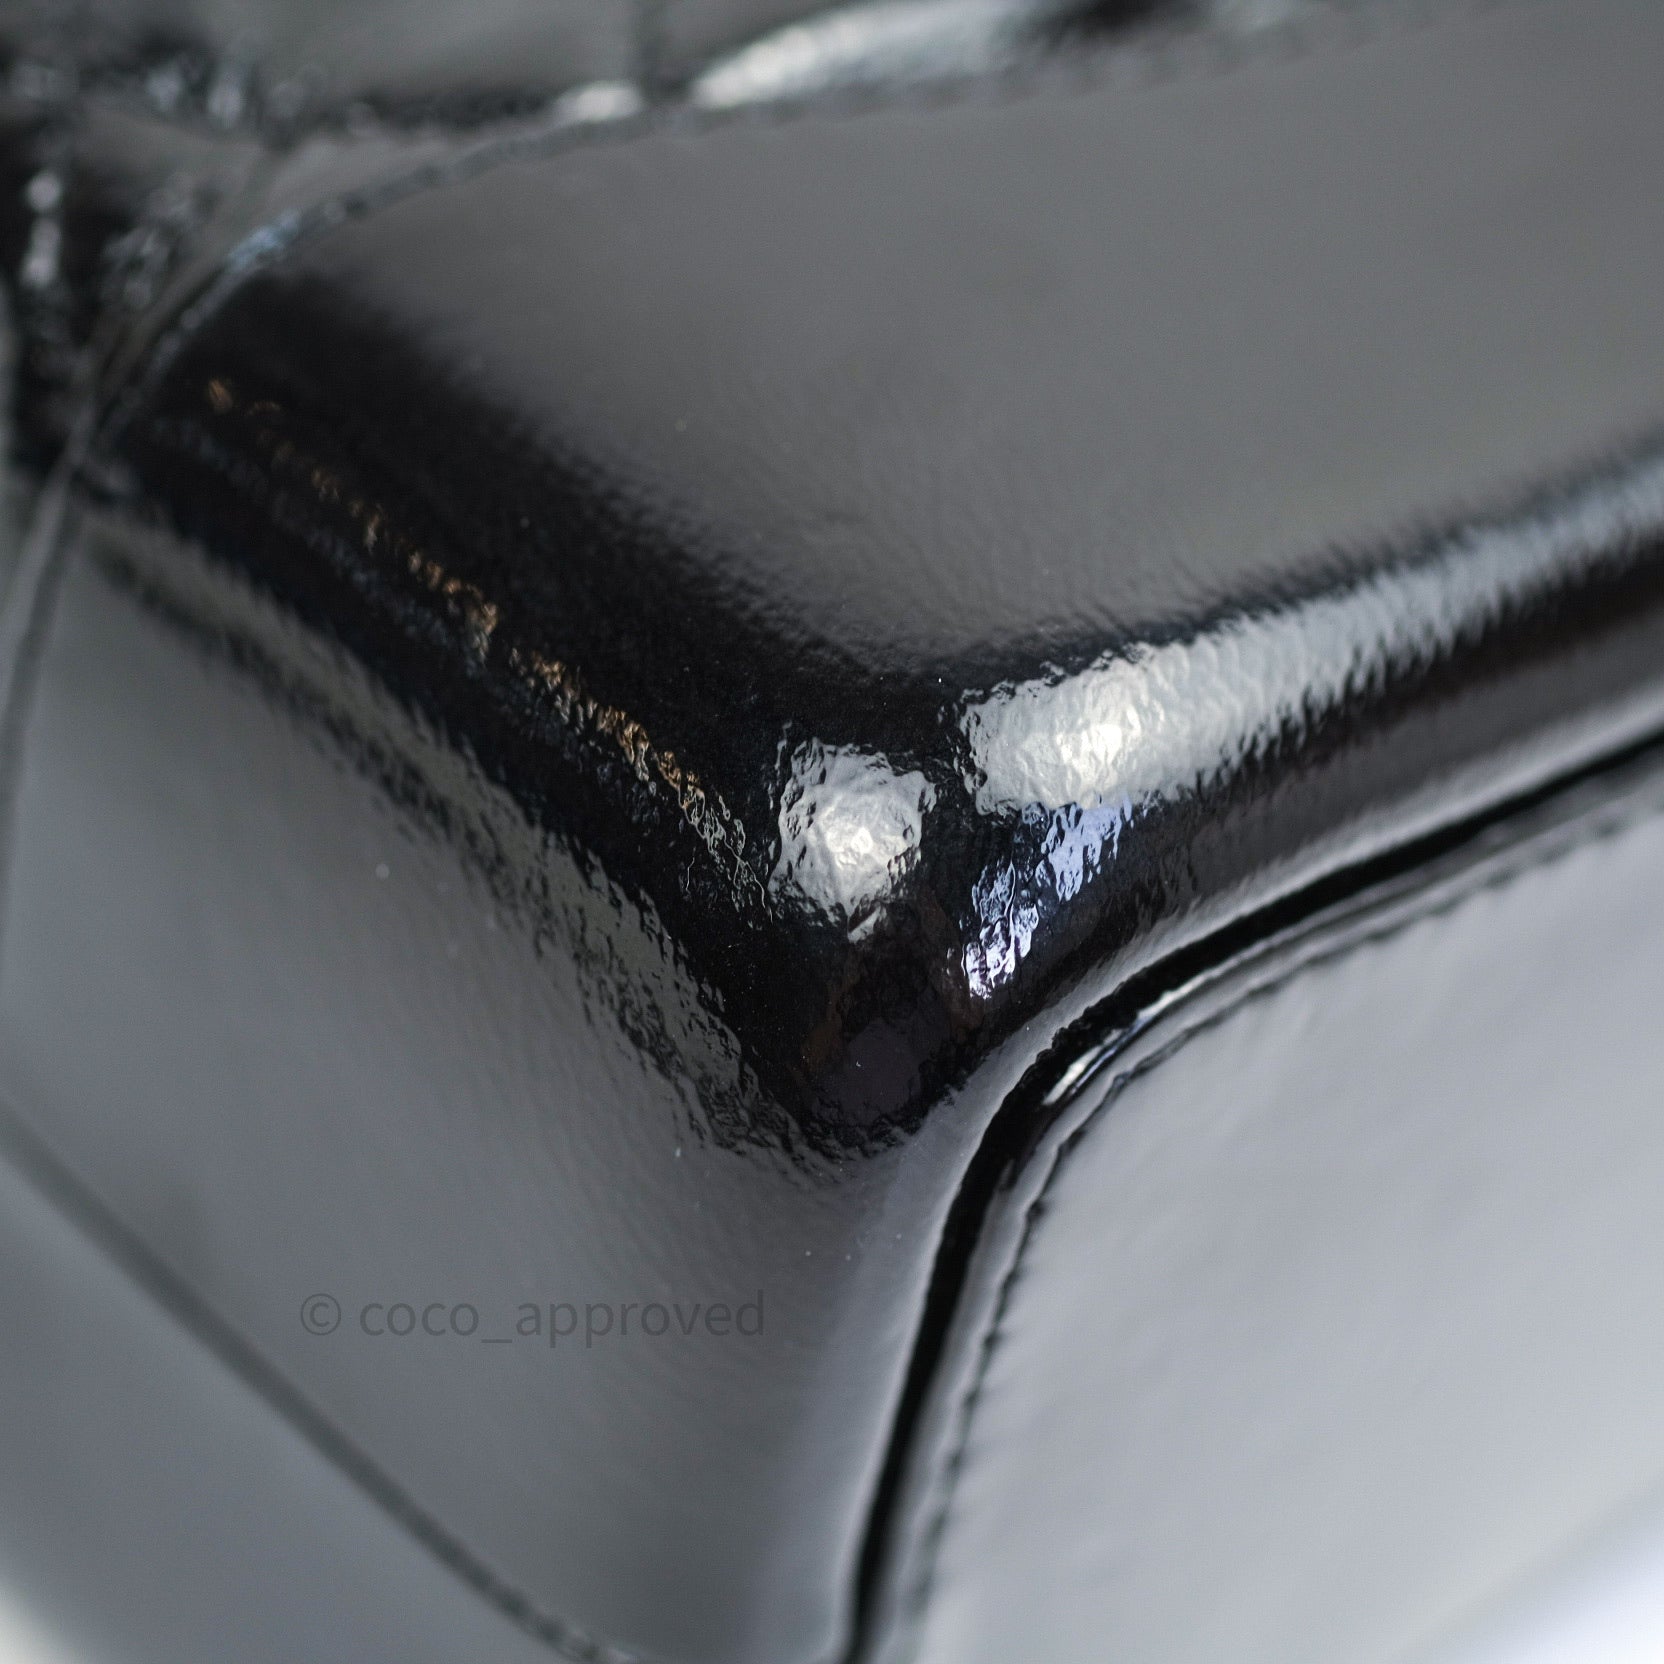 Gabrielle leather backpack Chanel Black in Leather - 33331122